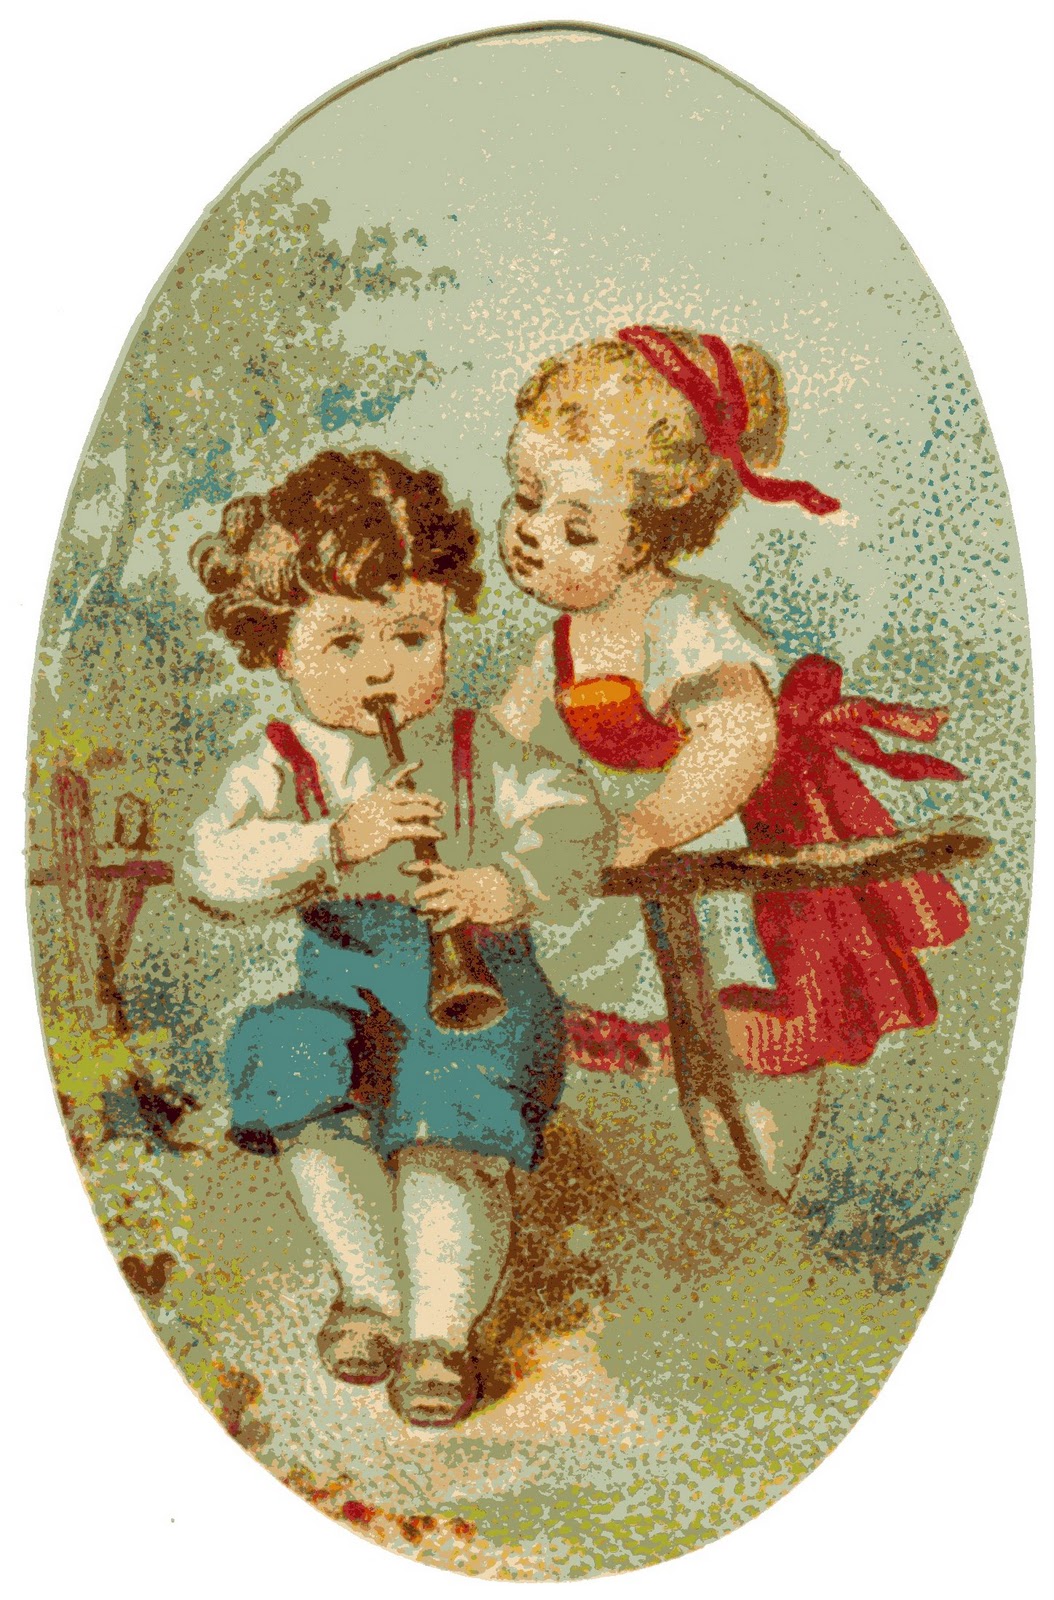 free clipart images victorian - photo #10